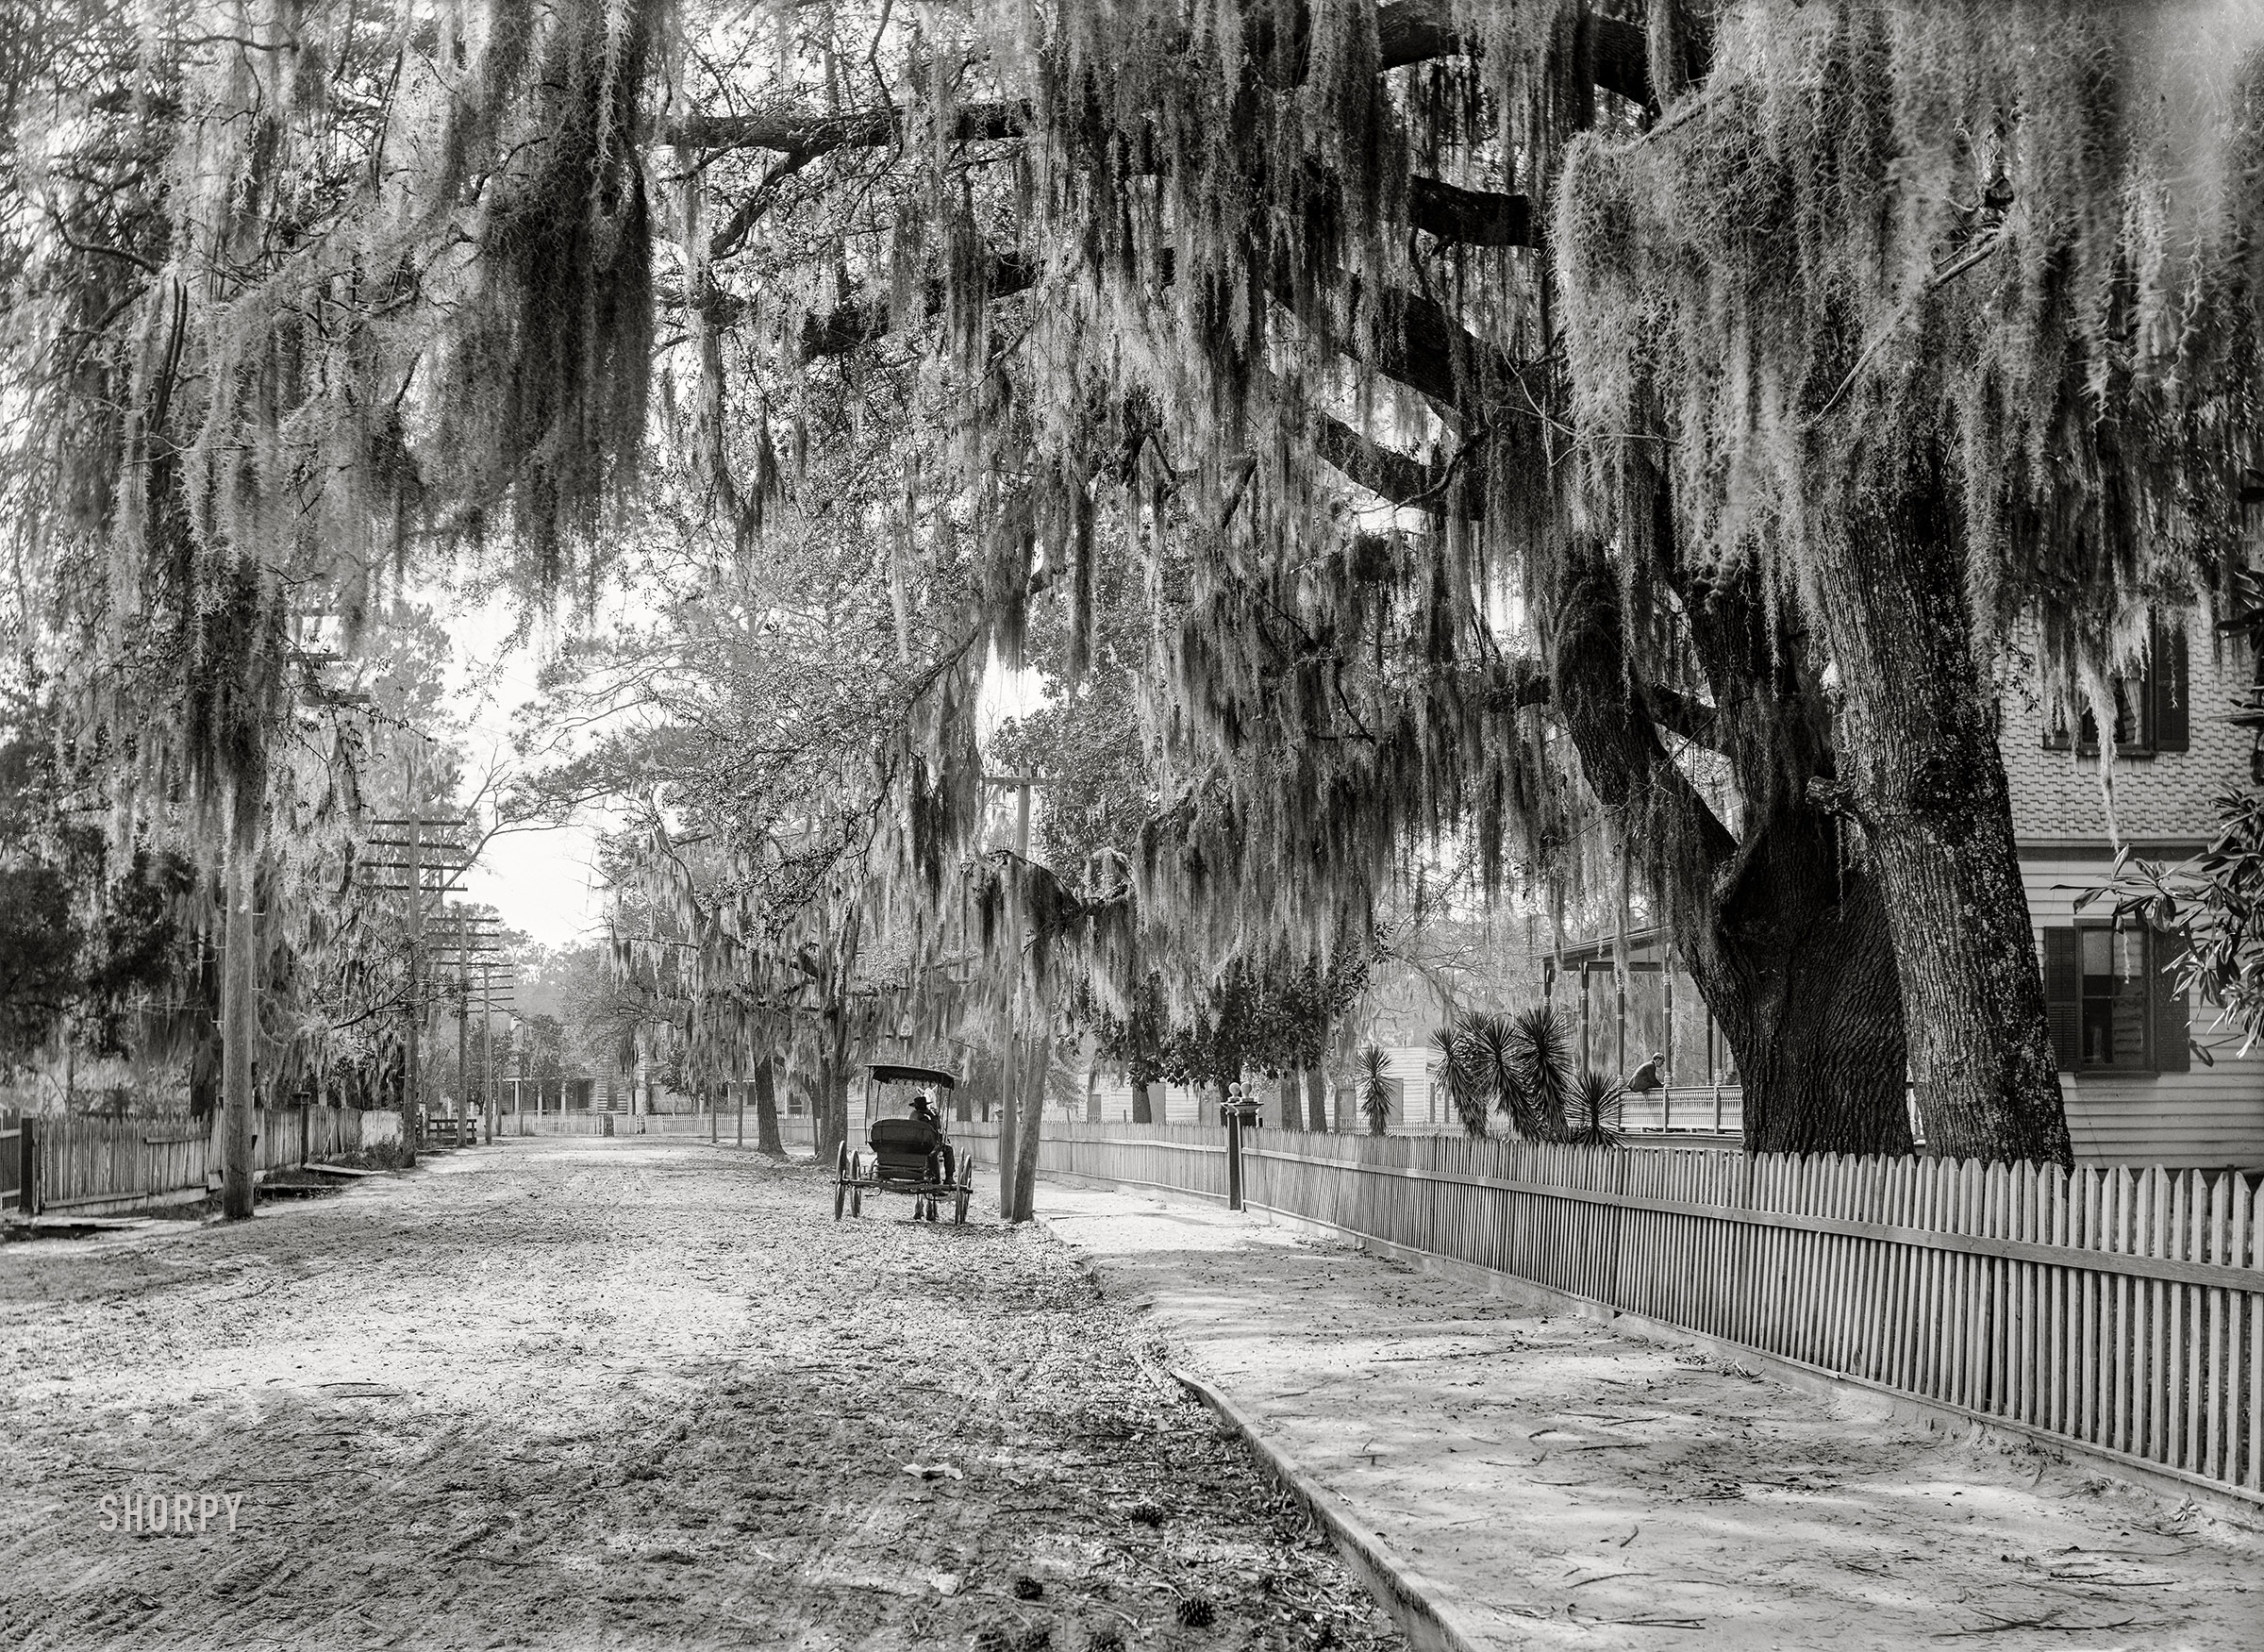 1906. "Sumter Avenue, Summerville, South Carolina." 5x7 inch dry plate glass negative, Detroit Publishing Company. View full size.